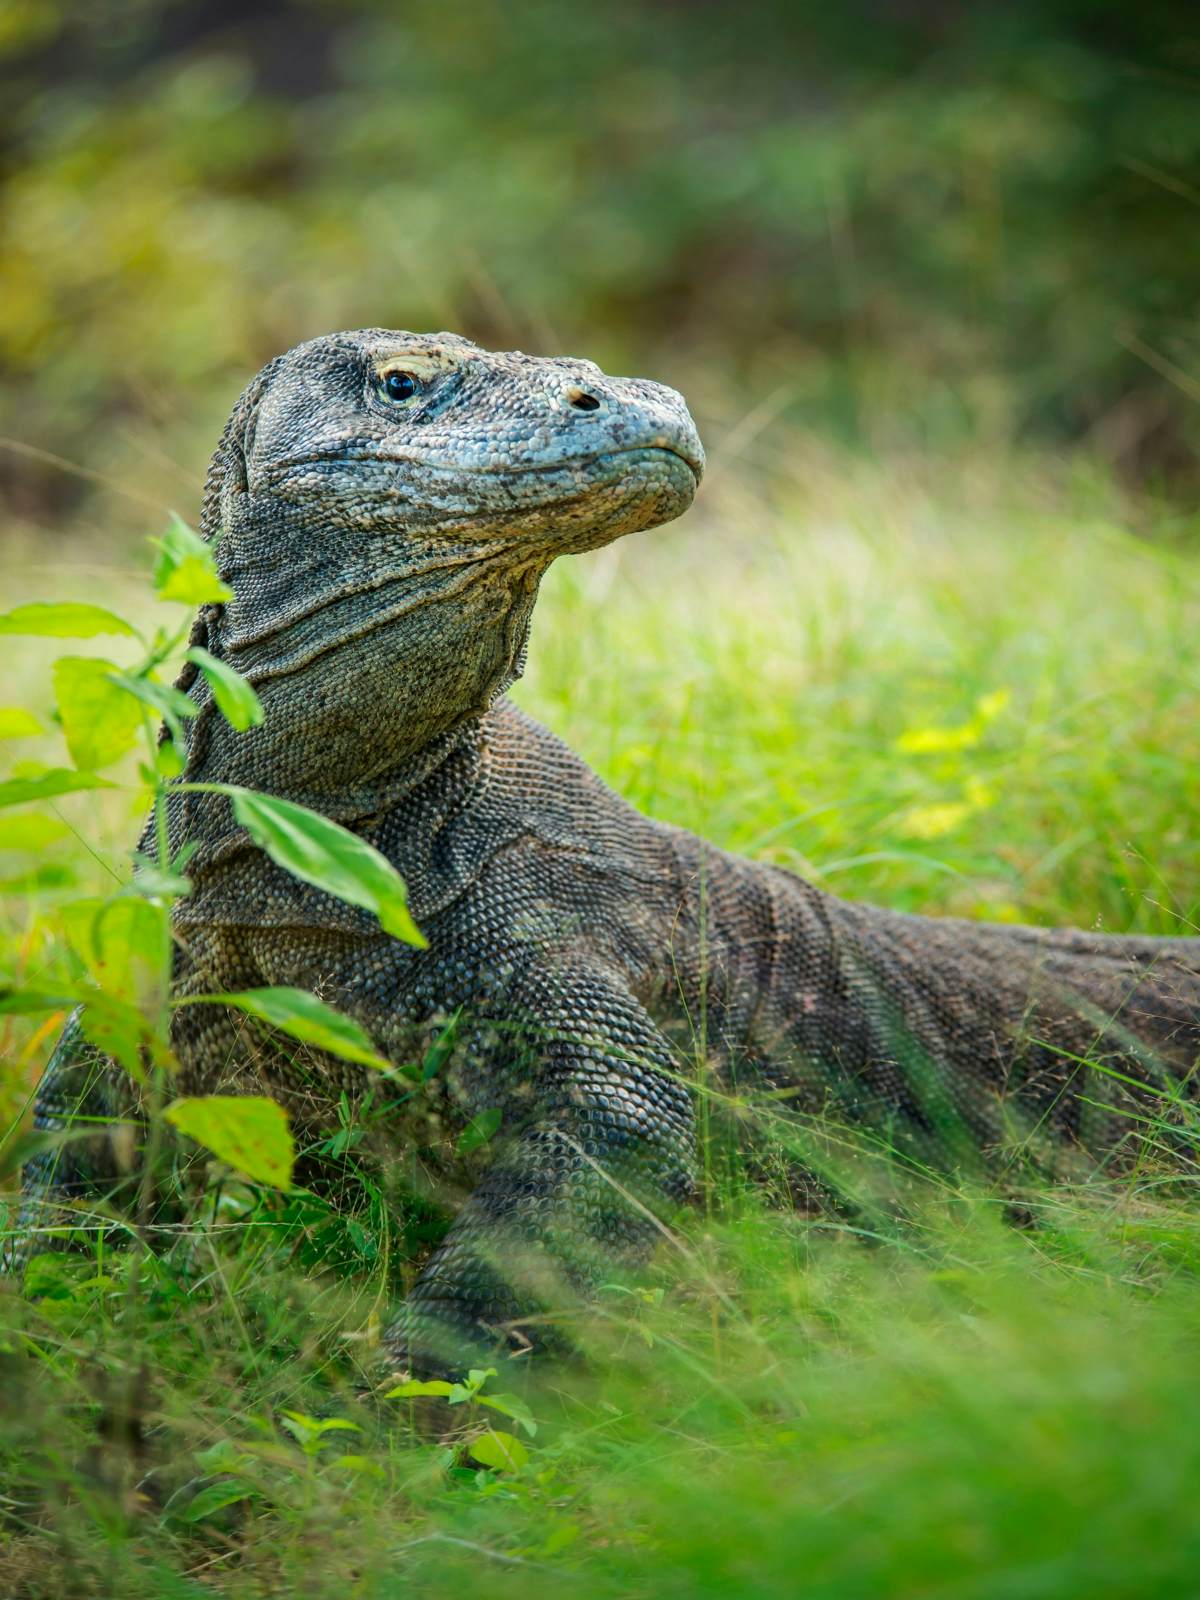 Enter The Dragon Exploring Komodo National Park S Wild Attractions Lonely Planet